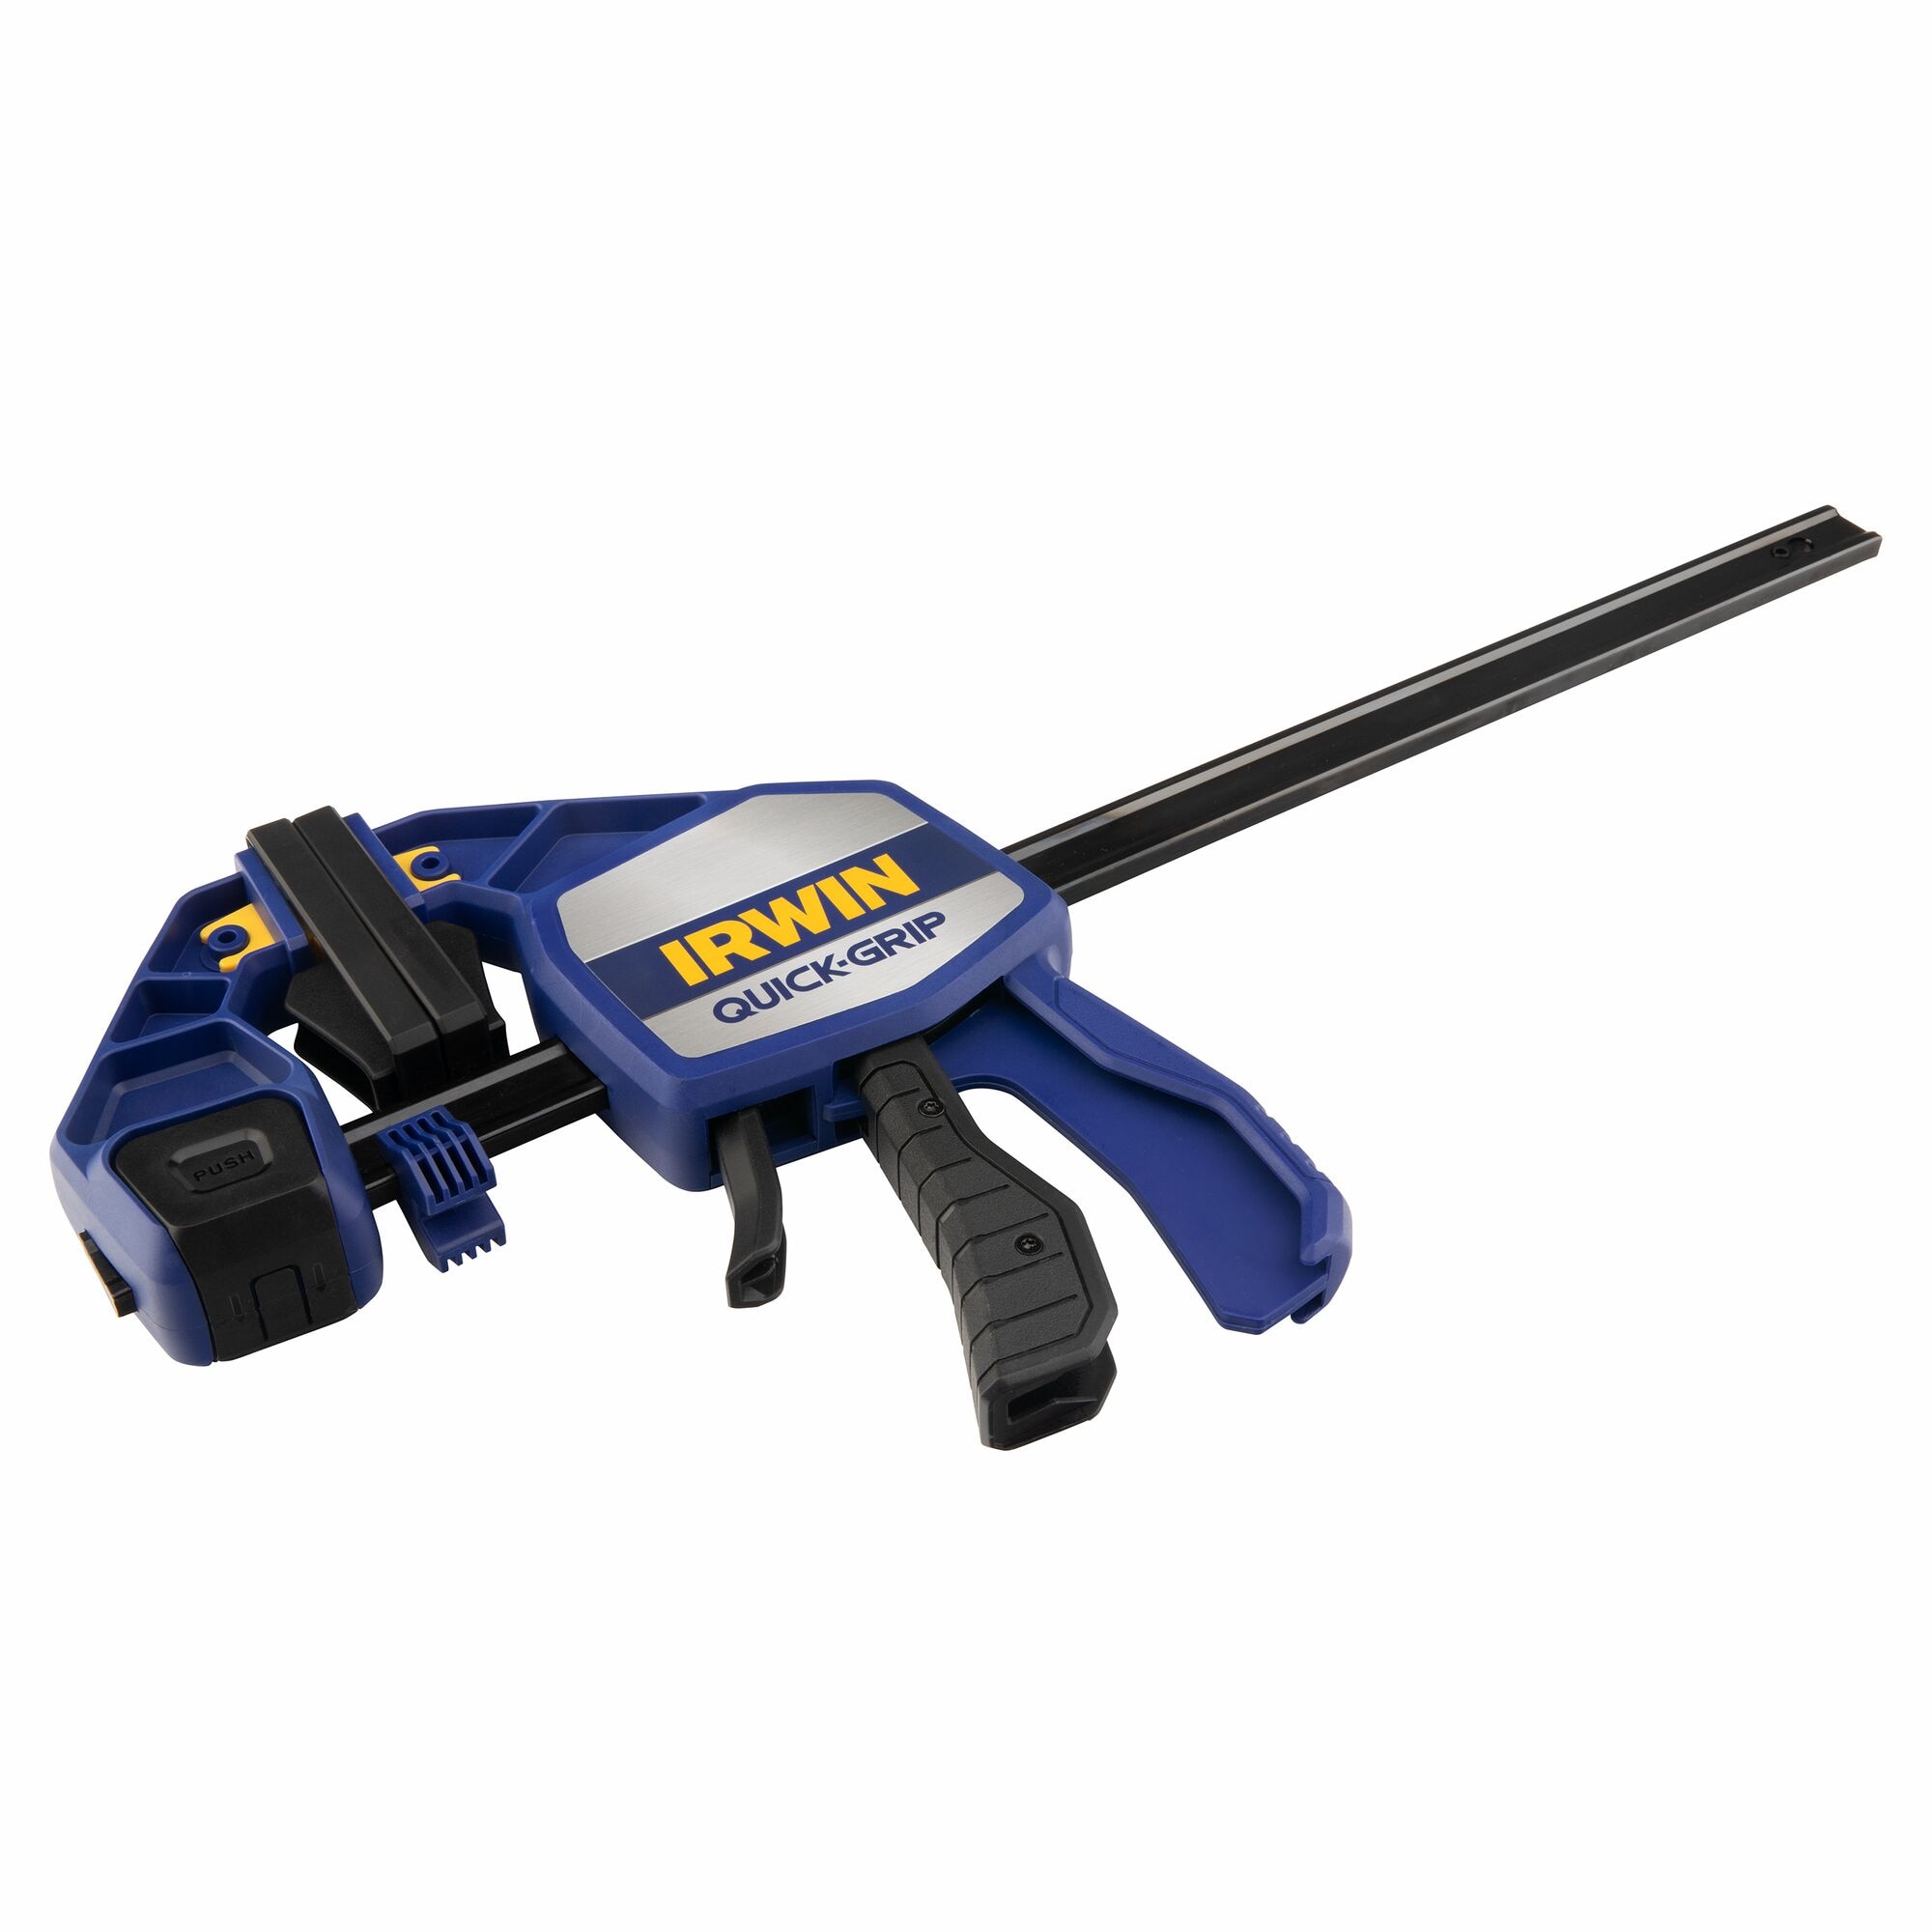 IRWIN QUICK-GRIP 12-in Heavy-Duty One Handed Bar Clamp in the 